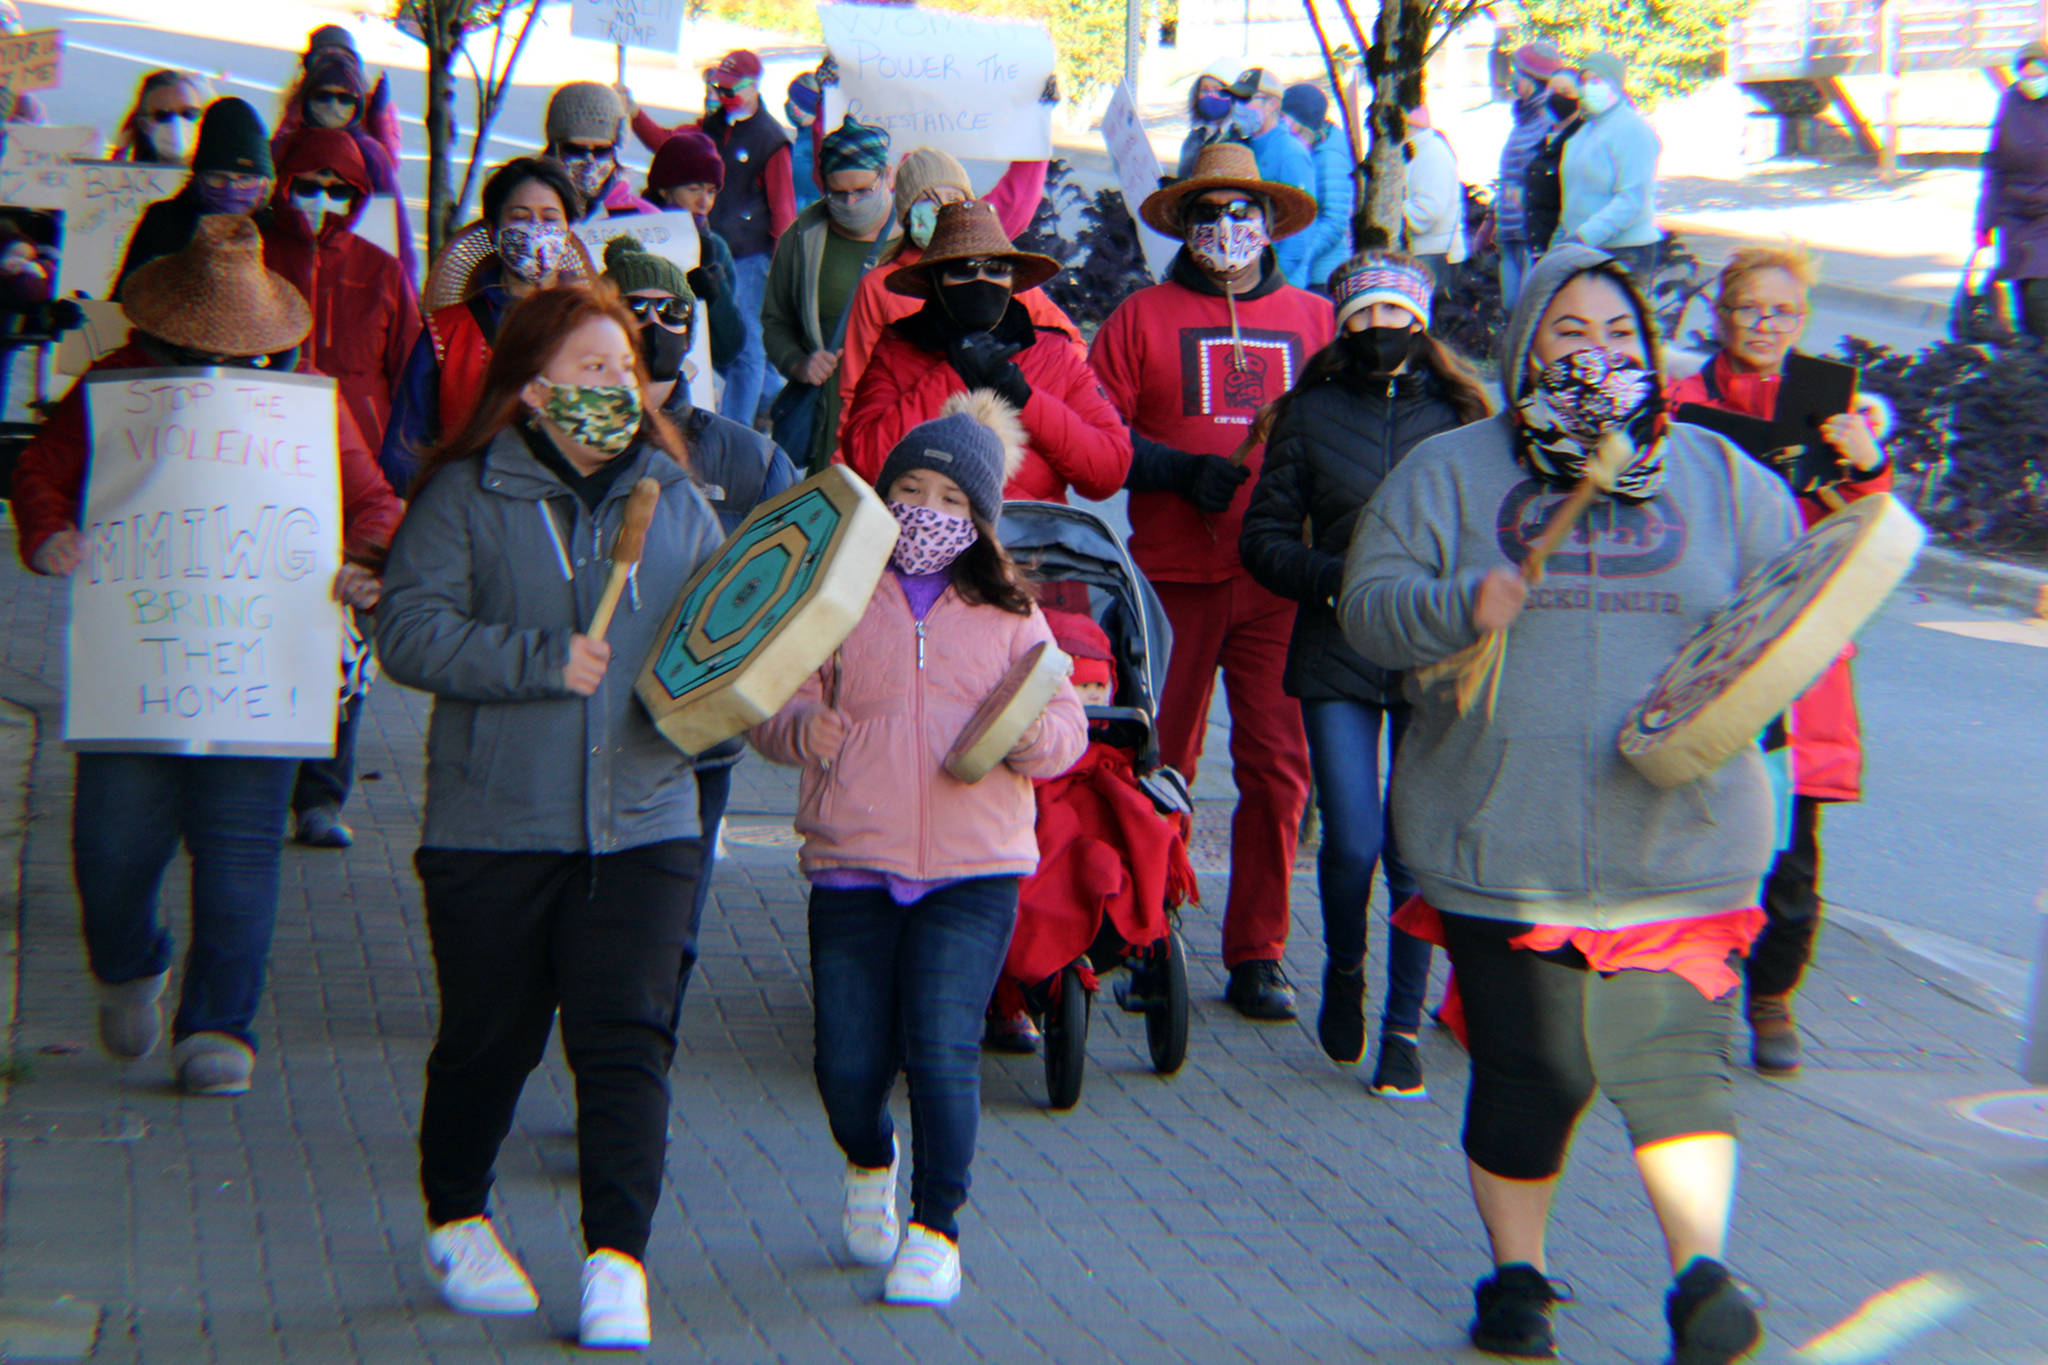 Marchers make their way toward Mayor Bill Overstreet Park on Saturday, Oct. 17. The march and rally were part of events held nationwide. (Ben Hohenstatt / Juneau Empire)